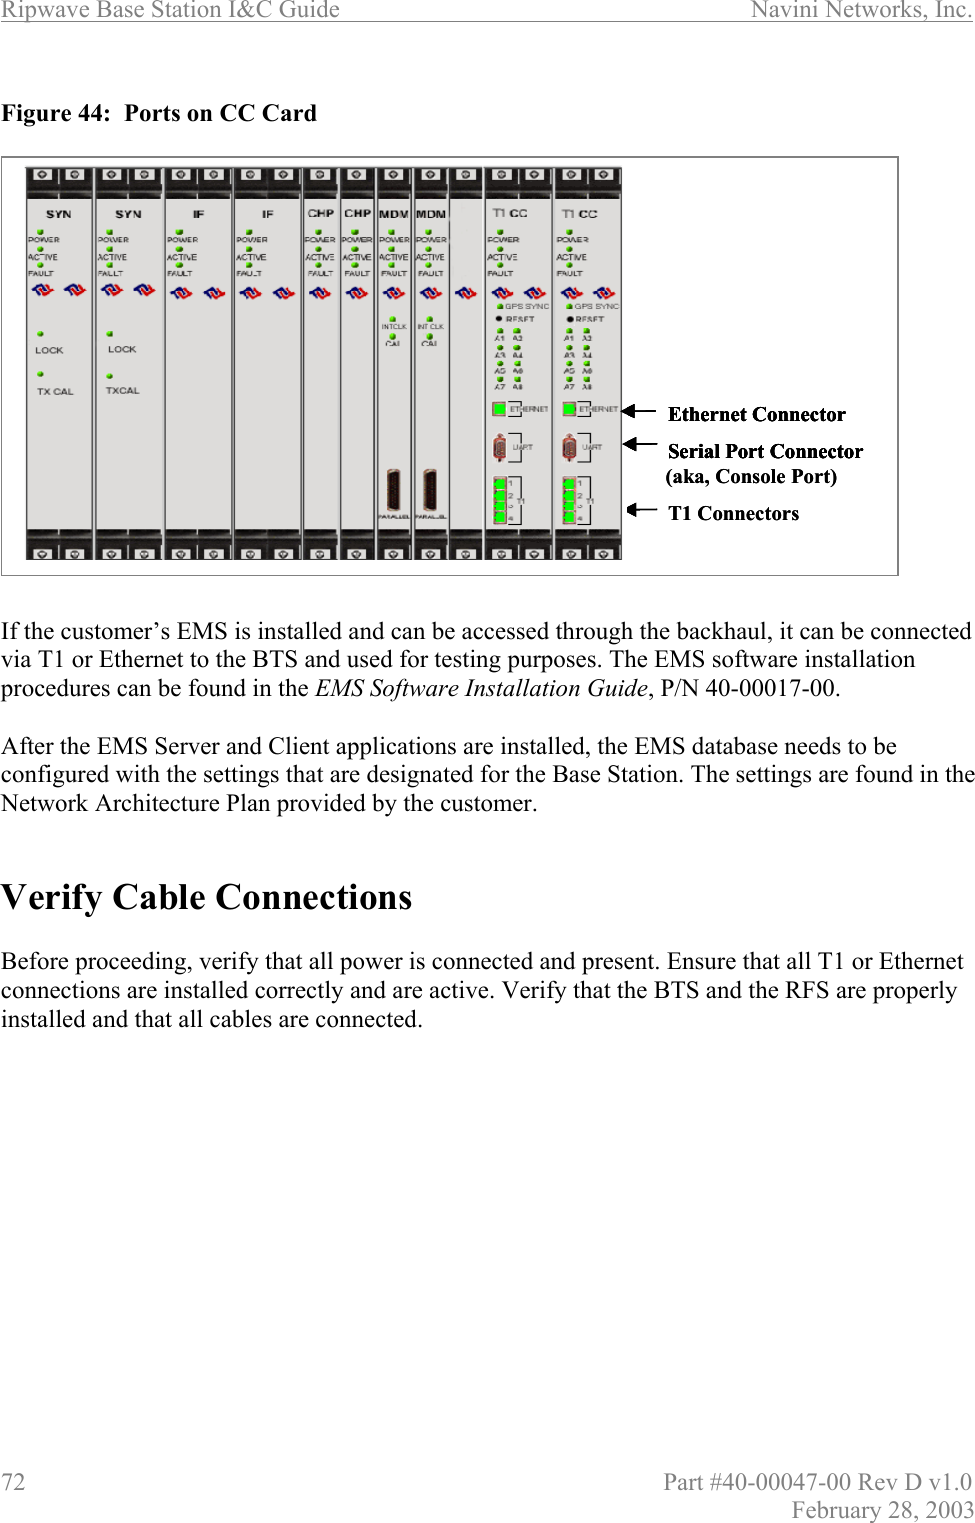 Ripwave Base Station I&amp;C Guide                      Navini Networks, Inc. 72                          Part #40-00047-00 Rev D v1.0 February 28, 2003  Figure 44:  Ports on CC Card                  If the customer’s EMS is installed and can be accessed through the backhaul, it can be connected via T1 or Ethernet to the BTS and used for testing purposes. The EMS software installation procedures can be found in the EMS Software Installation Guide, P/N 40-00017-00.  After the EMS Server and Client applications are installed, the EMS database needs to be configured with the settings that are designated for the Base Station. The settings are found in the Network Architecture Plan provided by the customer.    Verify Cable Connections  Before proceeding, verify that all power is connected and present. Ensure that all T1 or Ethernet connections are installed correctly and are active. Verify that the BTS and the RFS are properly installed and that all cables are connected.  Ethernet ConnectorT1 ConnectorsSerial Port ConnectorEthernet ConnectorSerial Port Connector(aka, Console Port)Ethernet ConnectorT1 ConnectorsSerial Port ConnectorEthernet ConnectorSerial Port Connector(aka, Console Port)